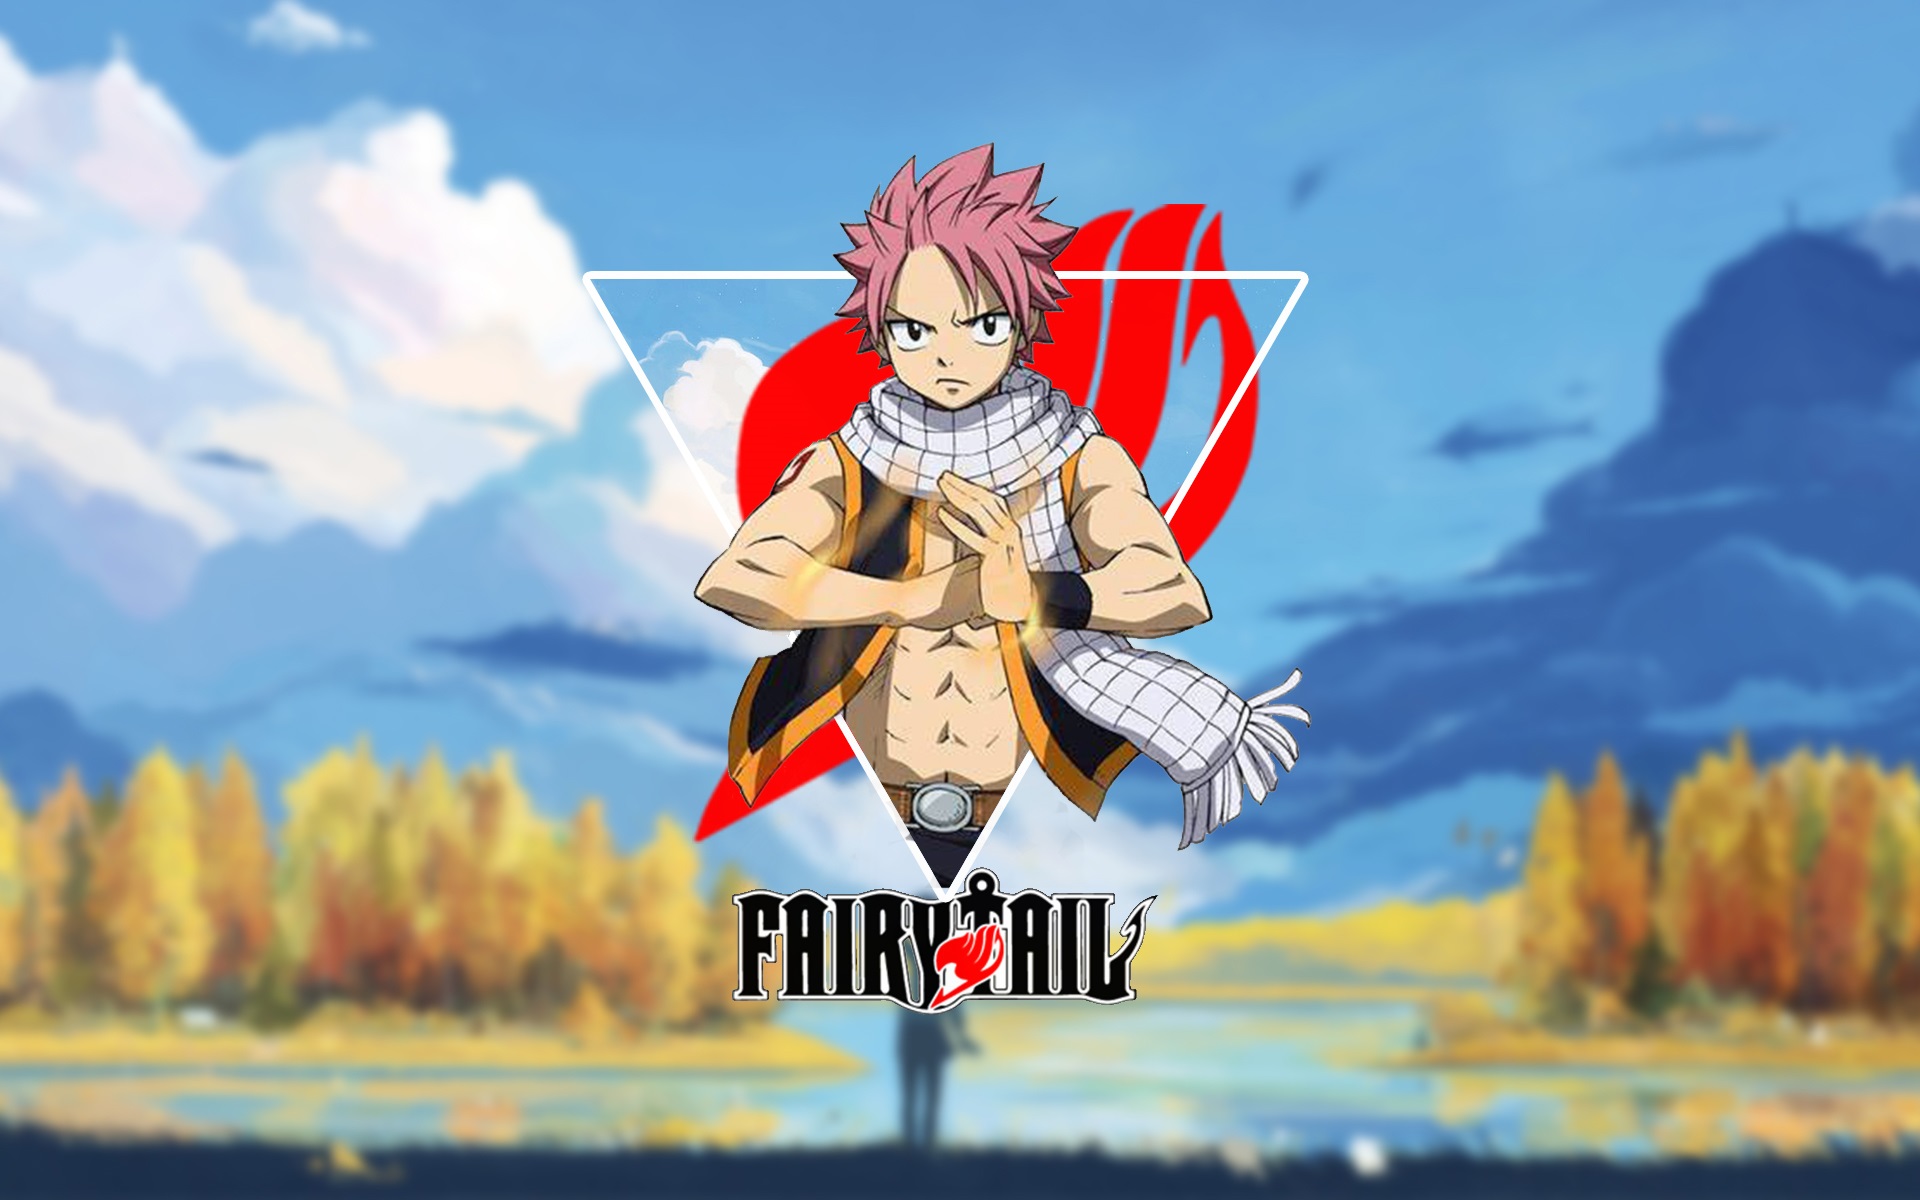 Anime 1920x1200 anime anime boys picture-in-picture Fairy Tail